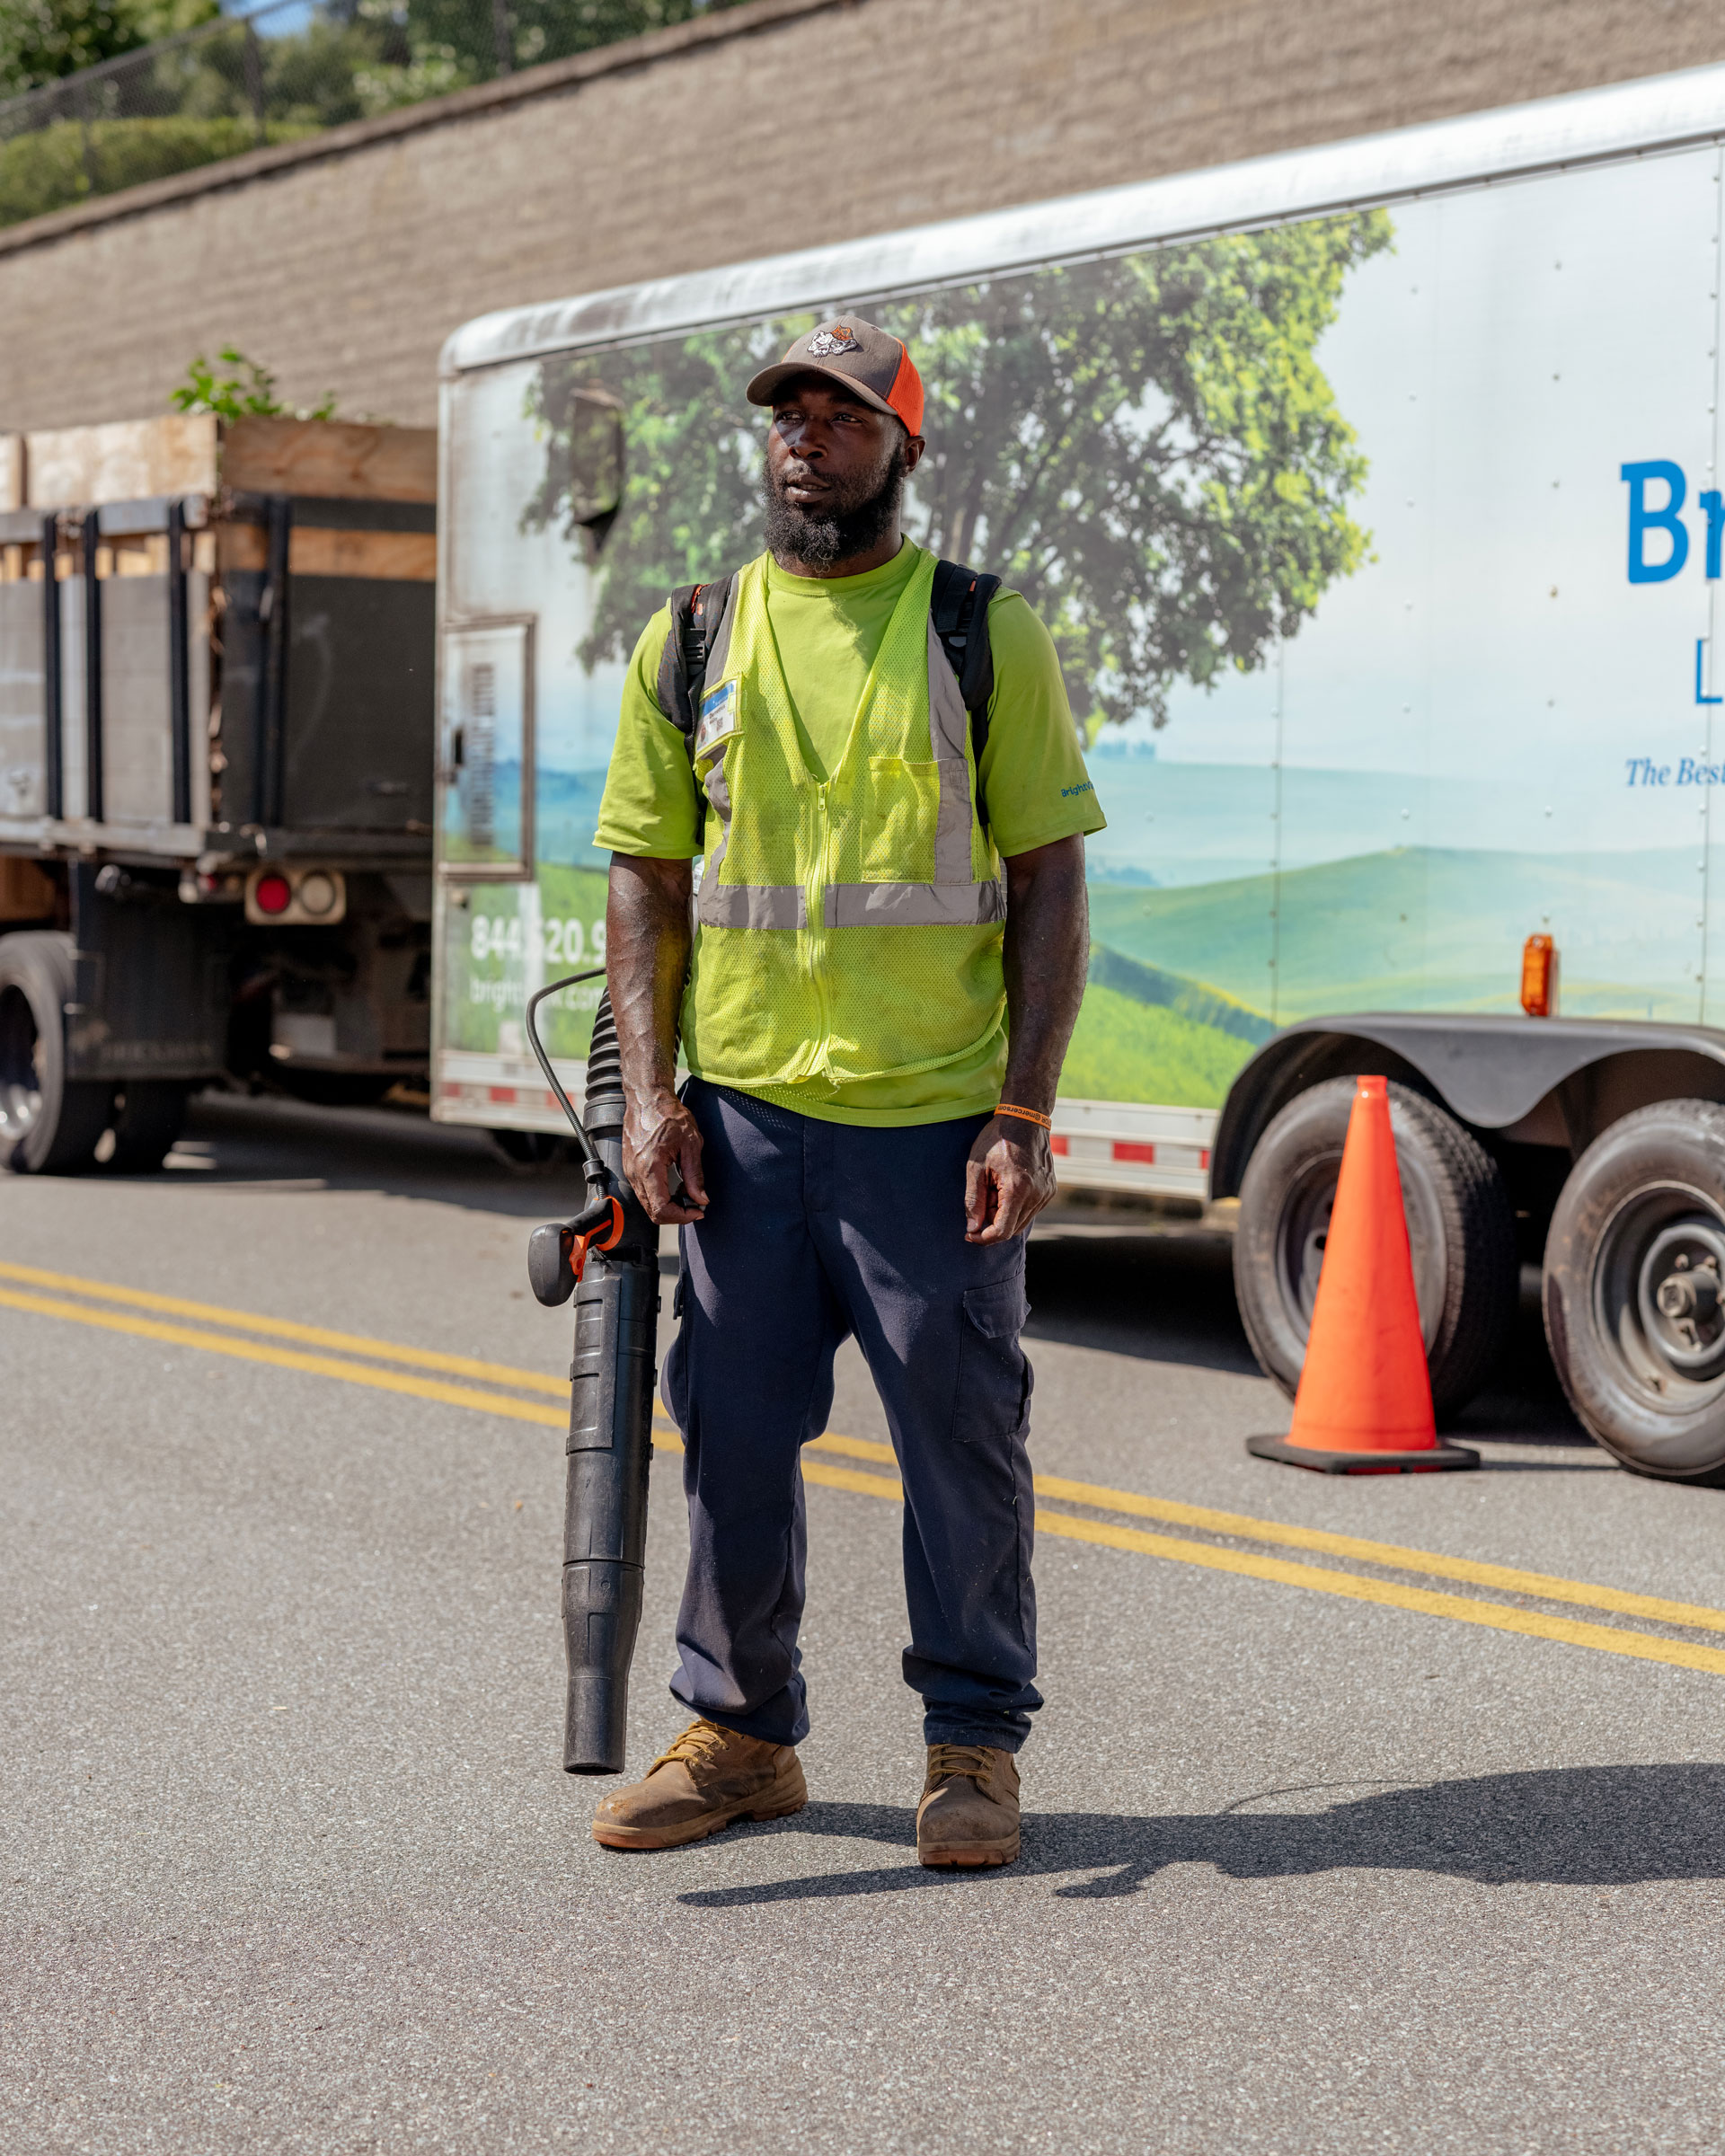 As a landscaper in Macon, Ga., Demetrus McCoy, 32, often works during the hottest parts of the day finding shade when he can inside the crew’s trailer. During four months on the job, McCoy says he’s seen colleagues get dehydrated and sick with heat exhaustion. (José Ibarra Rizo for TIME)